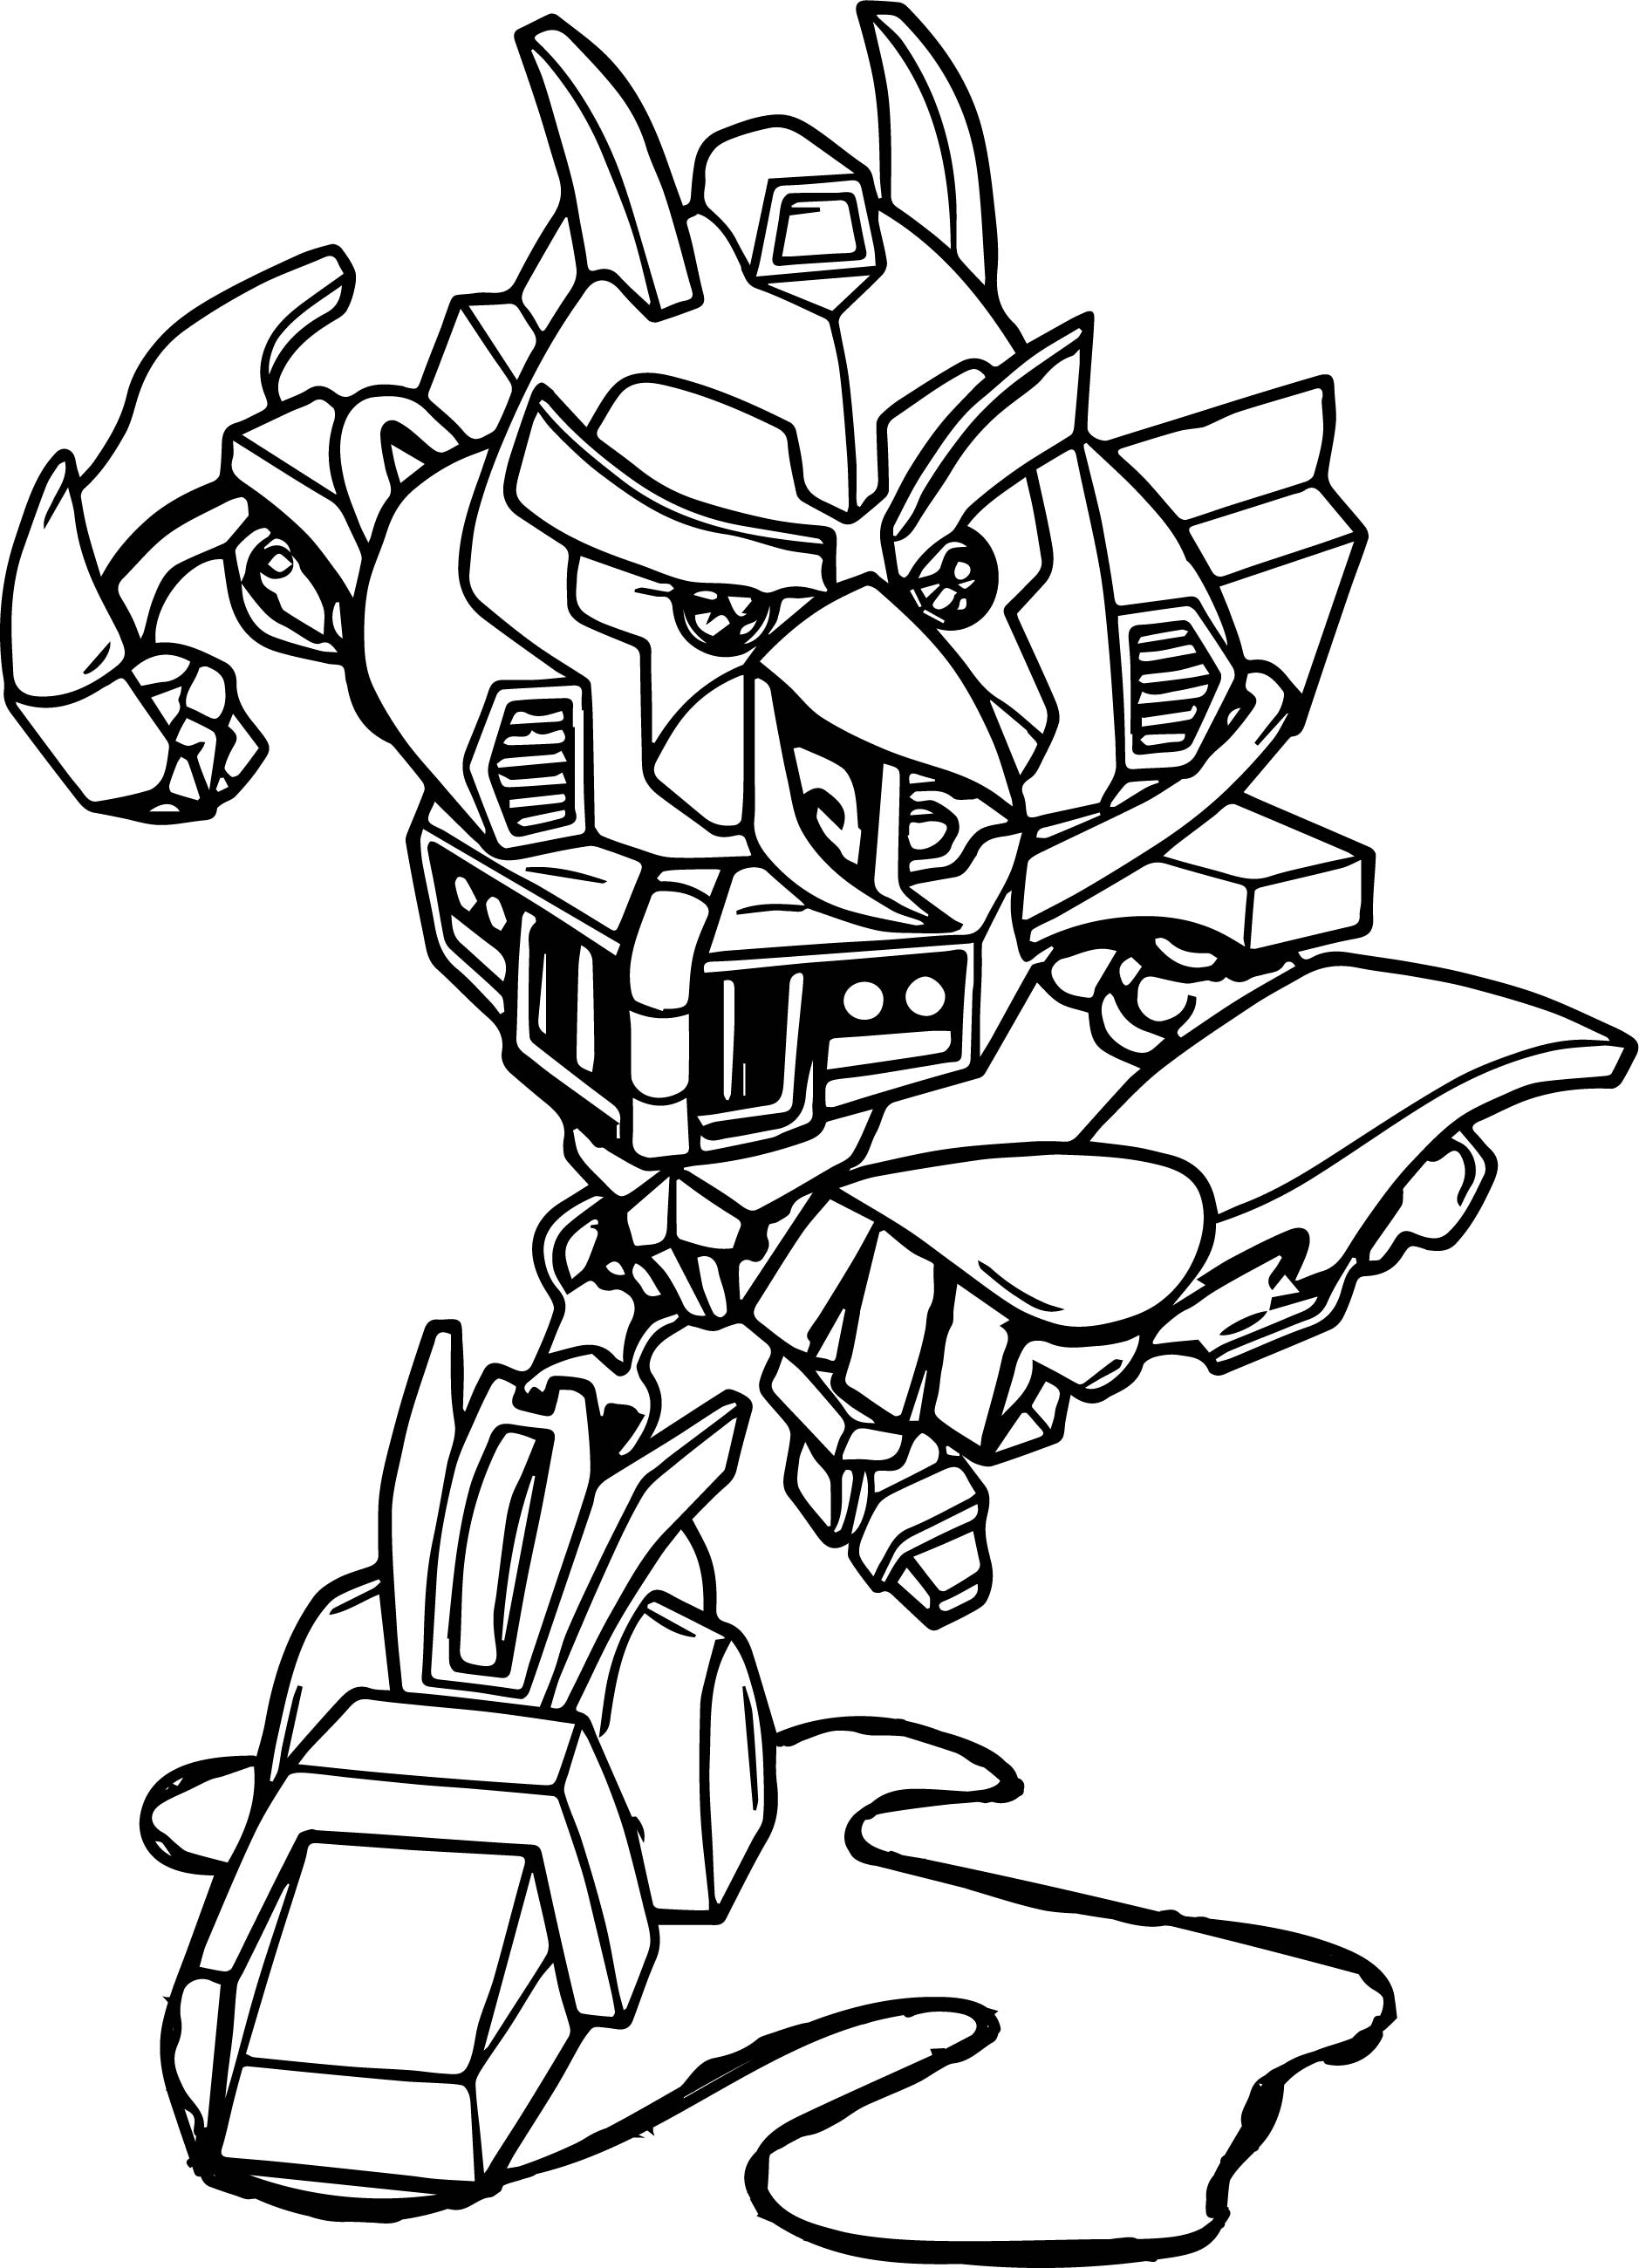 Lego Transformers Coloring Pages at Free printable